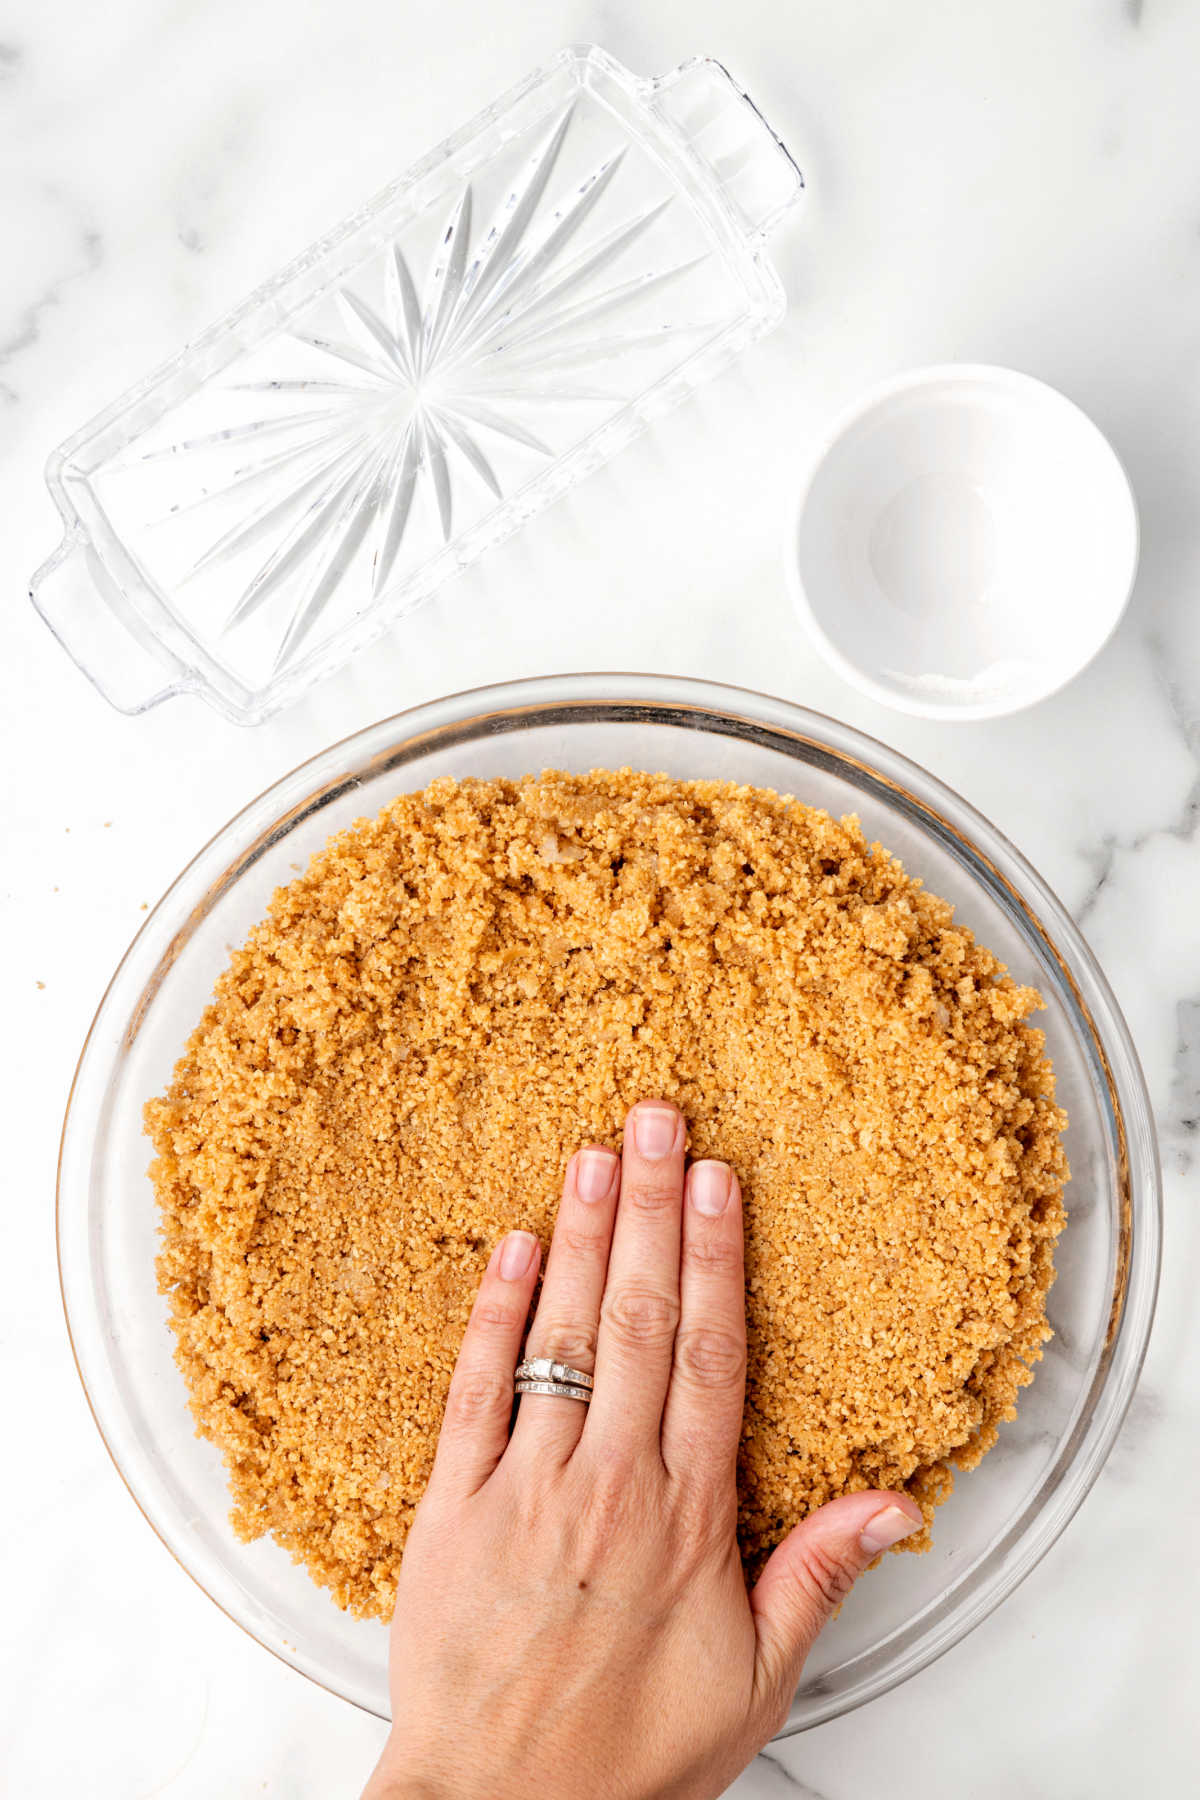 A hand patting graham cracker crumbs into a pie pan.